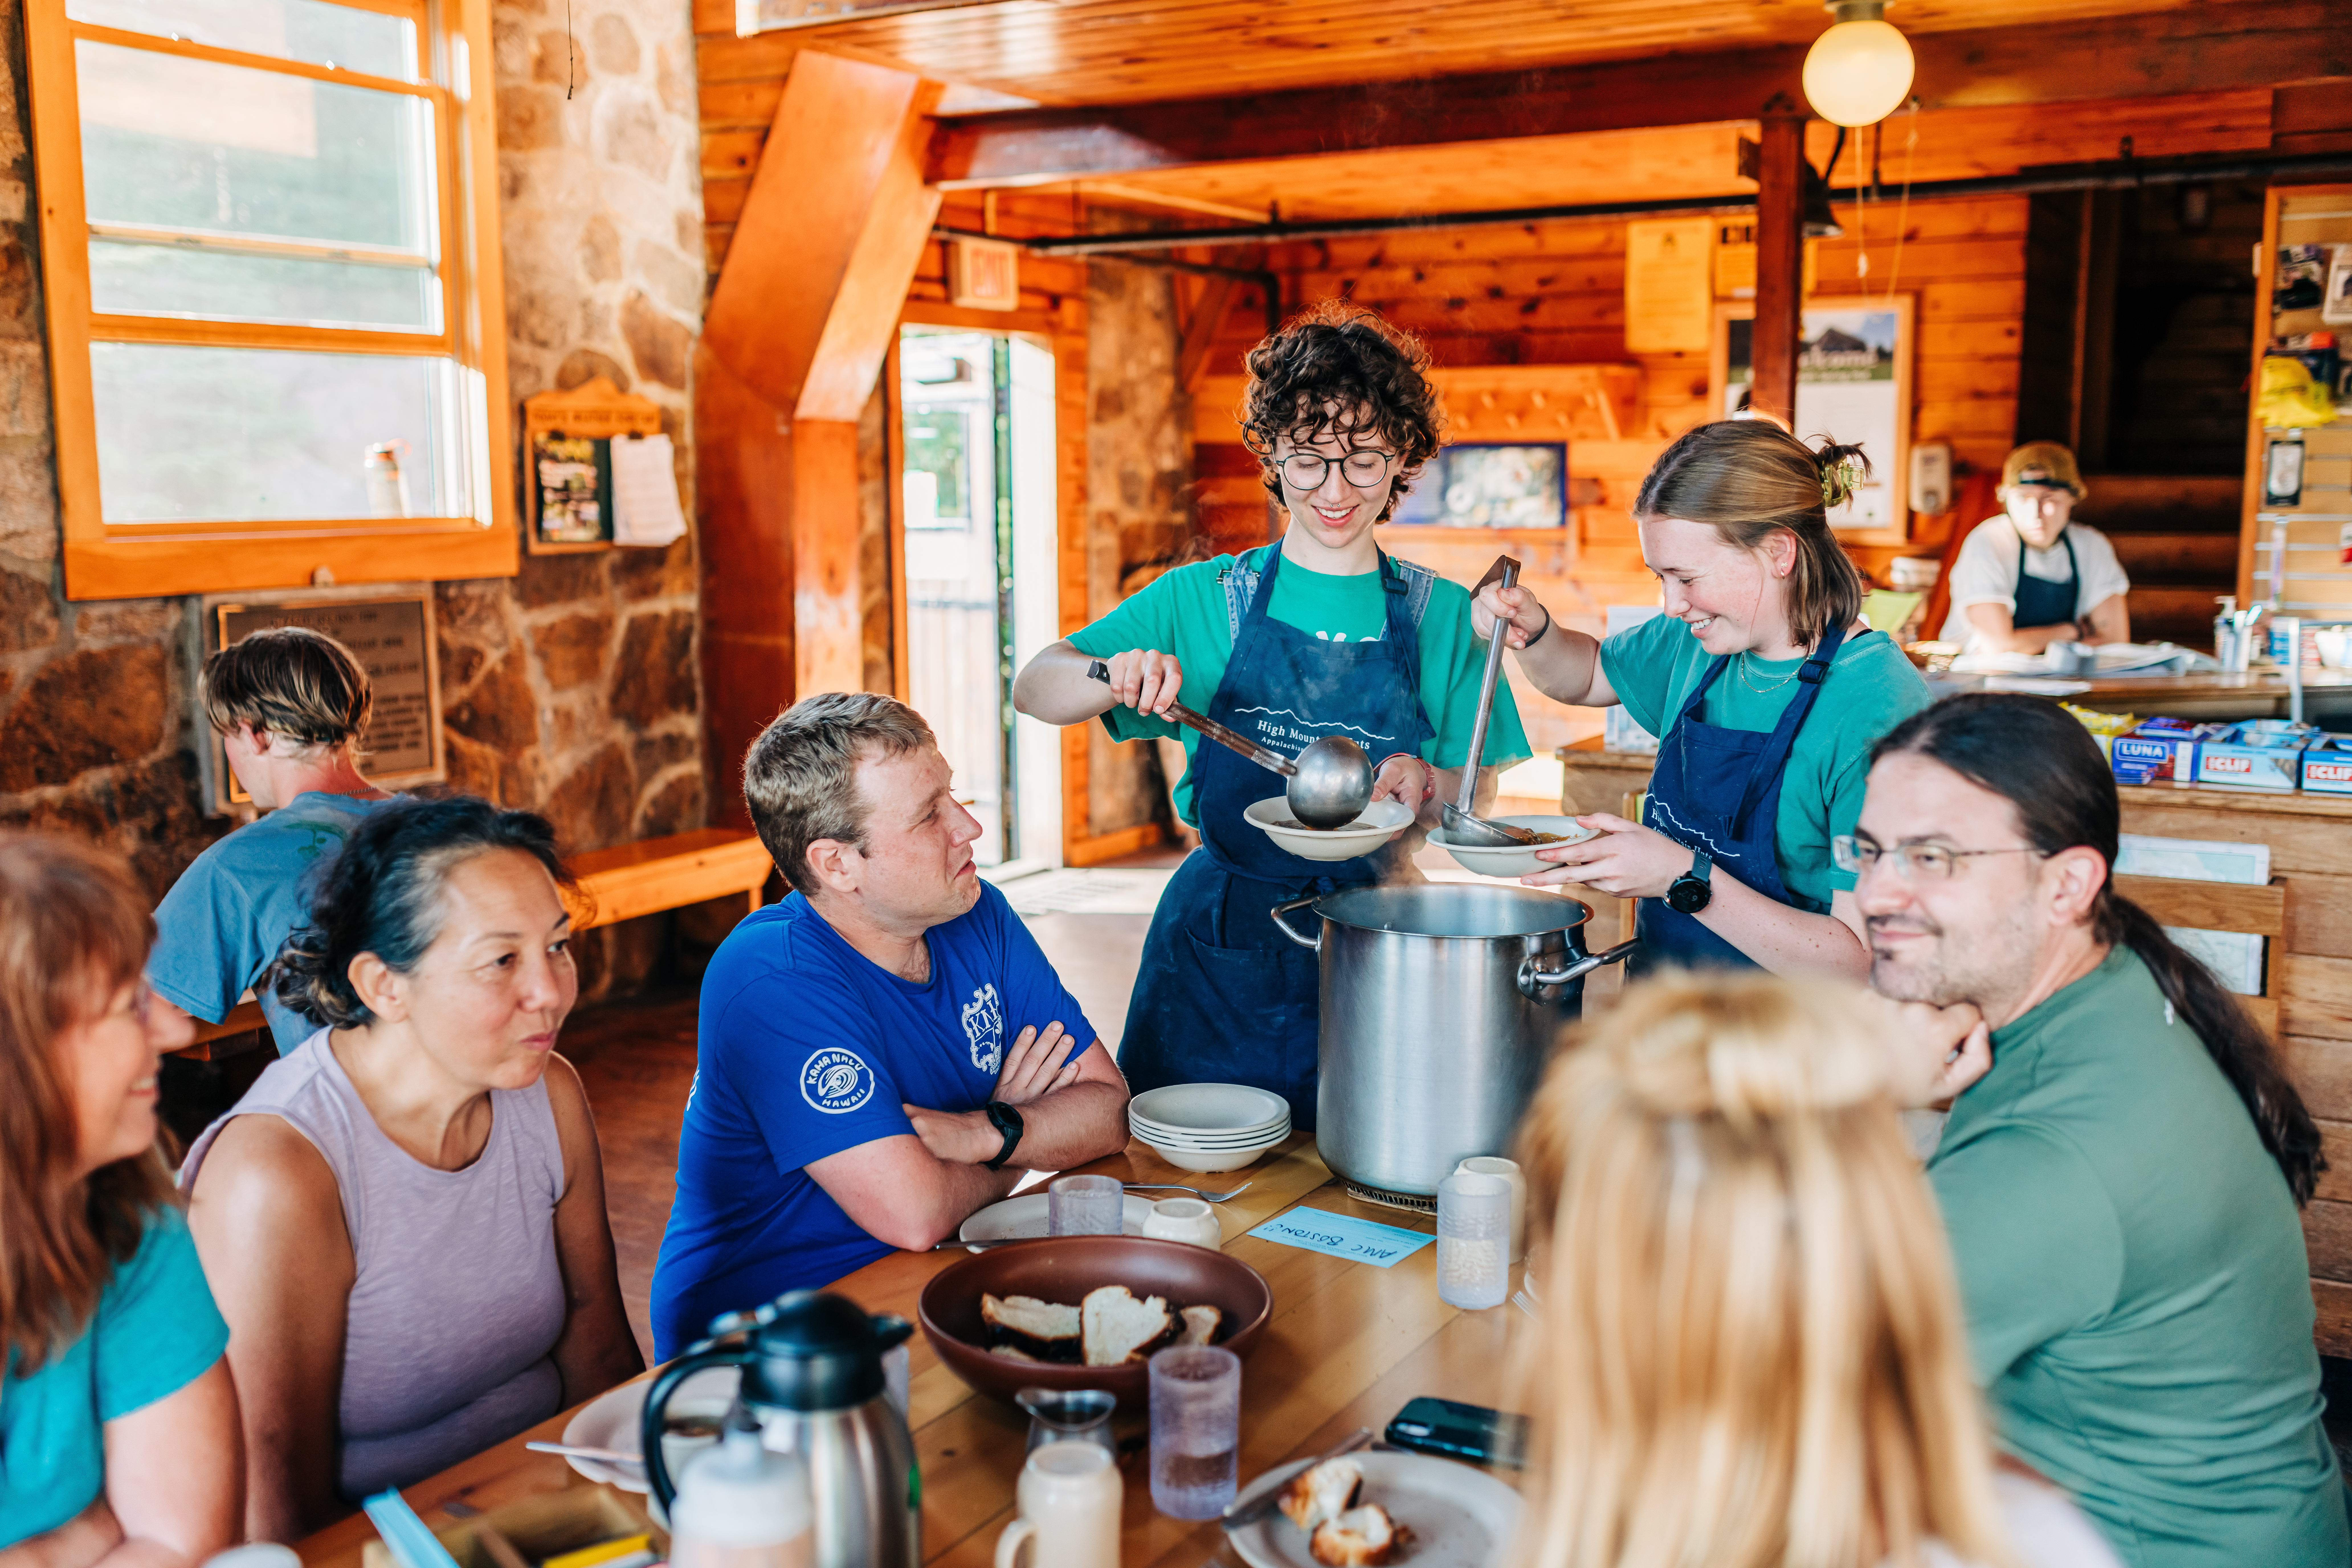 July 21, 2022. AMC Mizpah Spring Hut, Presidential Range, White Mountain National Forest, New Hampshire-- A Boston Chapter hut-to-hut trip. Photo by Corey David Photography.